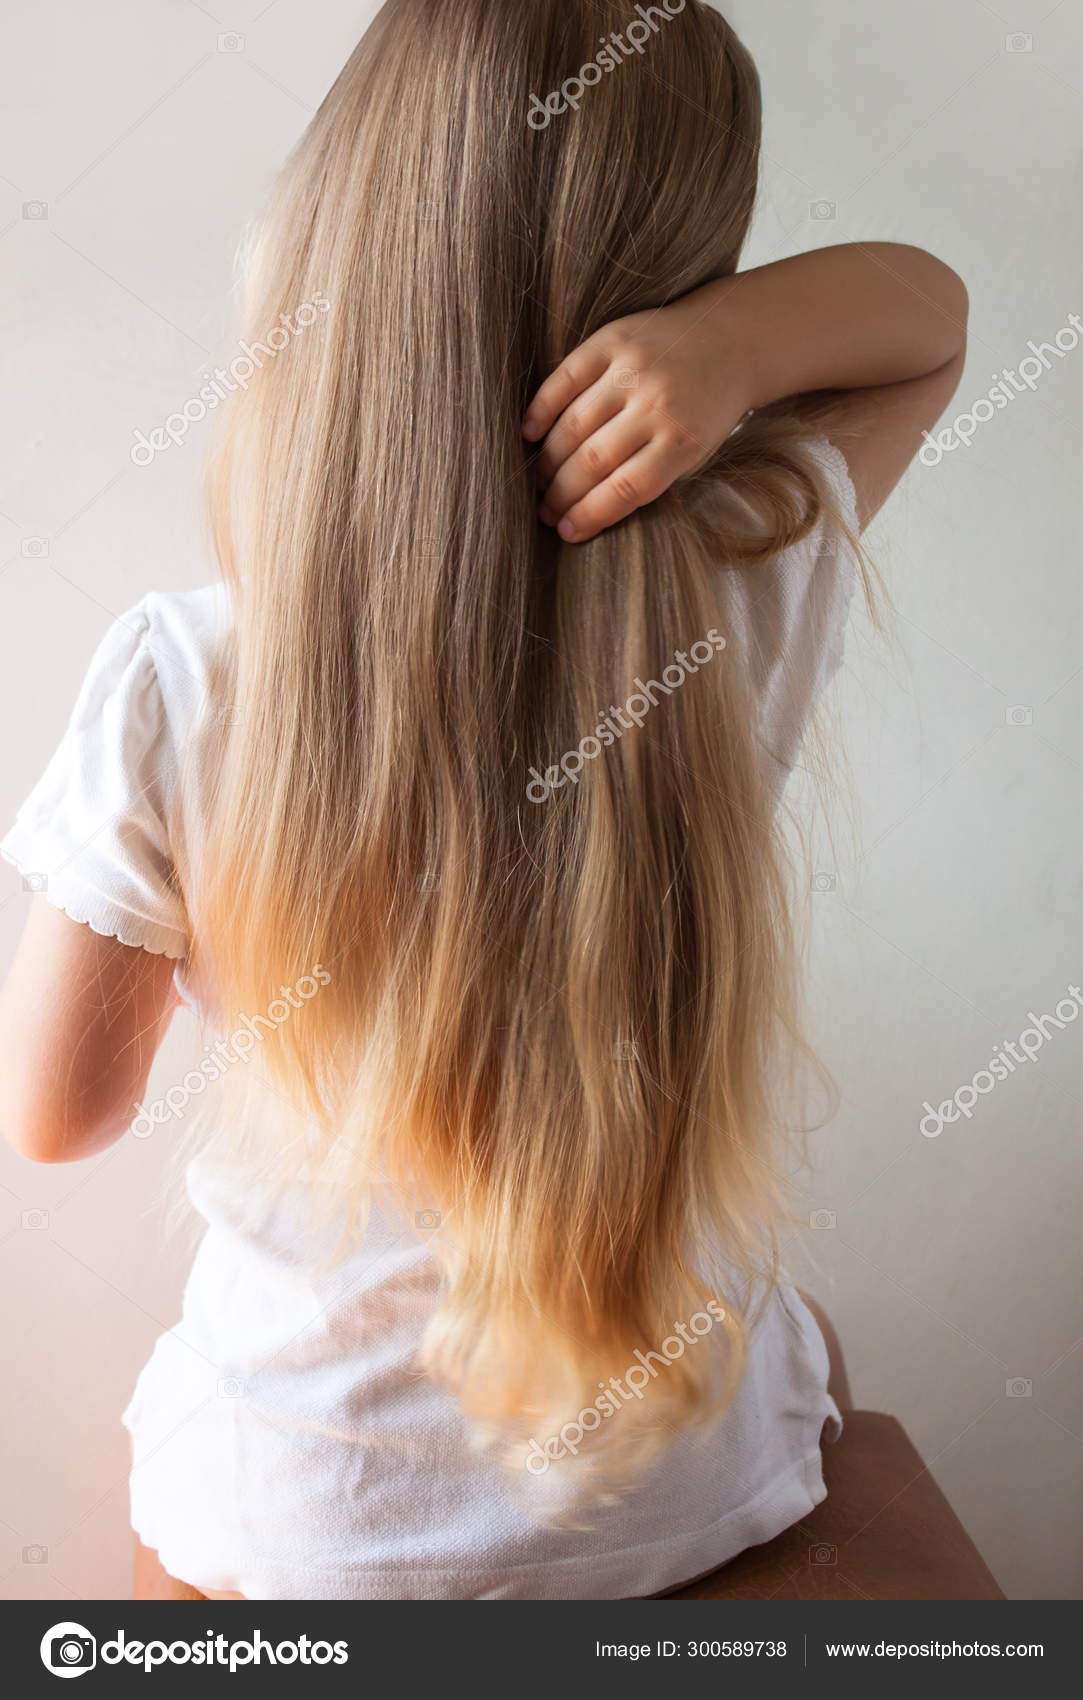 Cute Girl With Long Blond Hair Back View Of Little Girlie